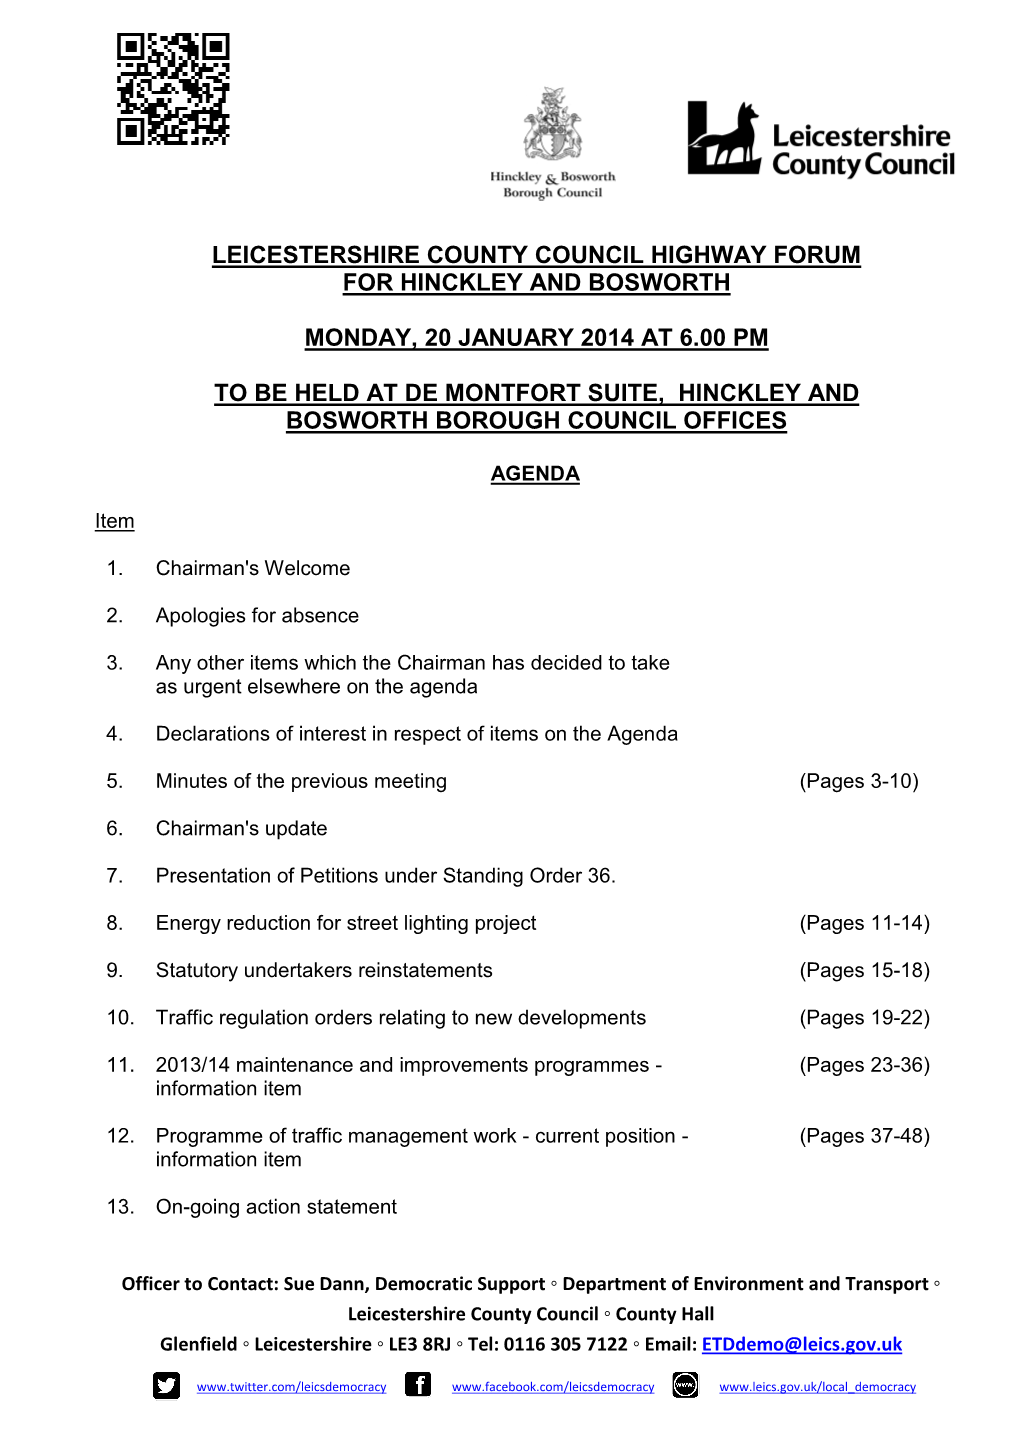 Leicestershire County Council Highway Forum for Hinckley and Bosworth